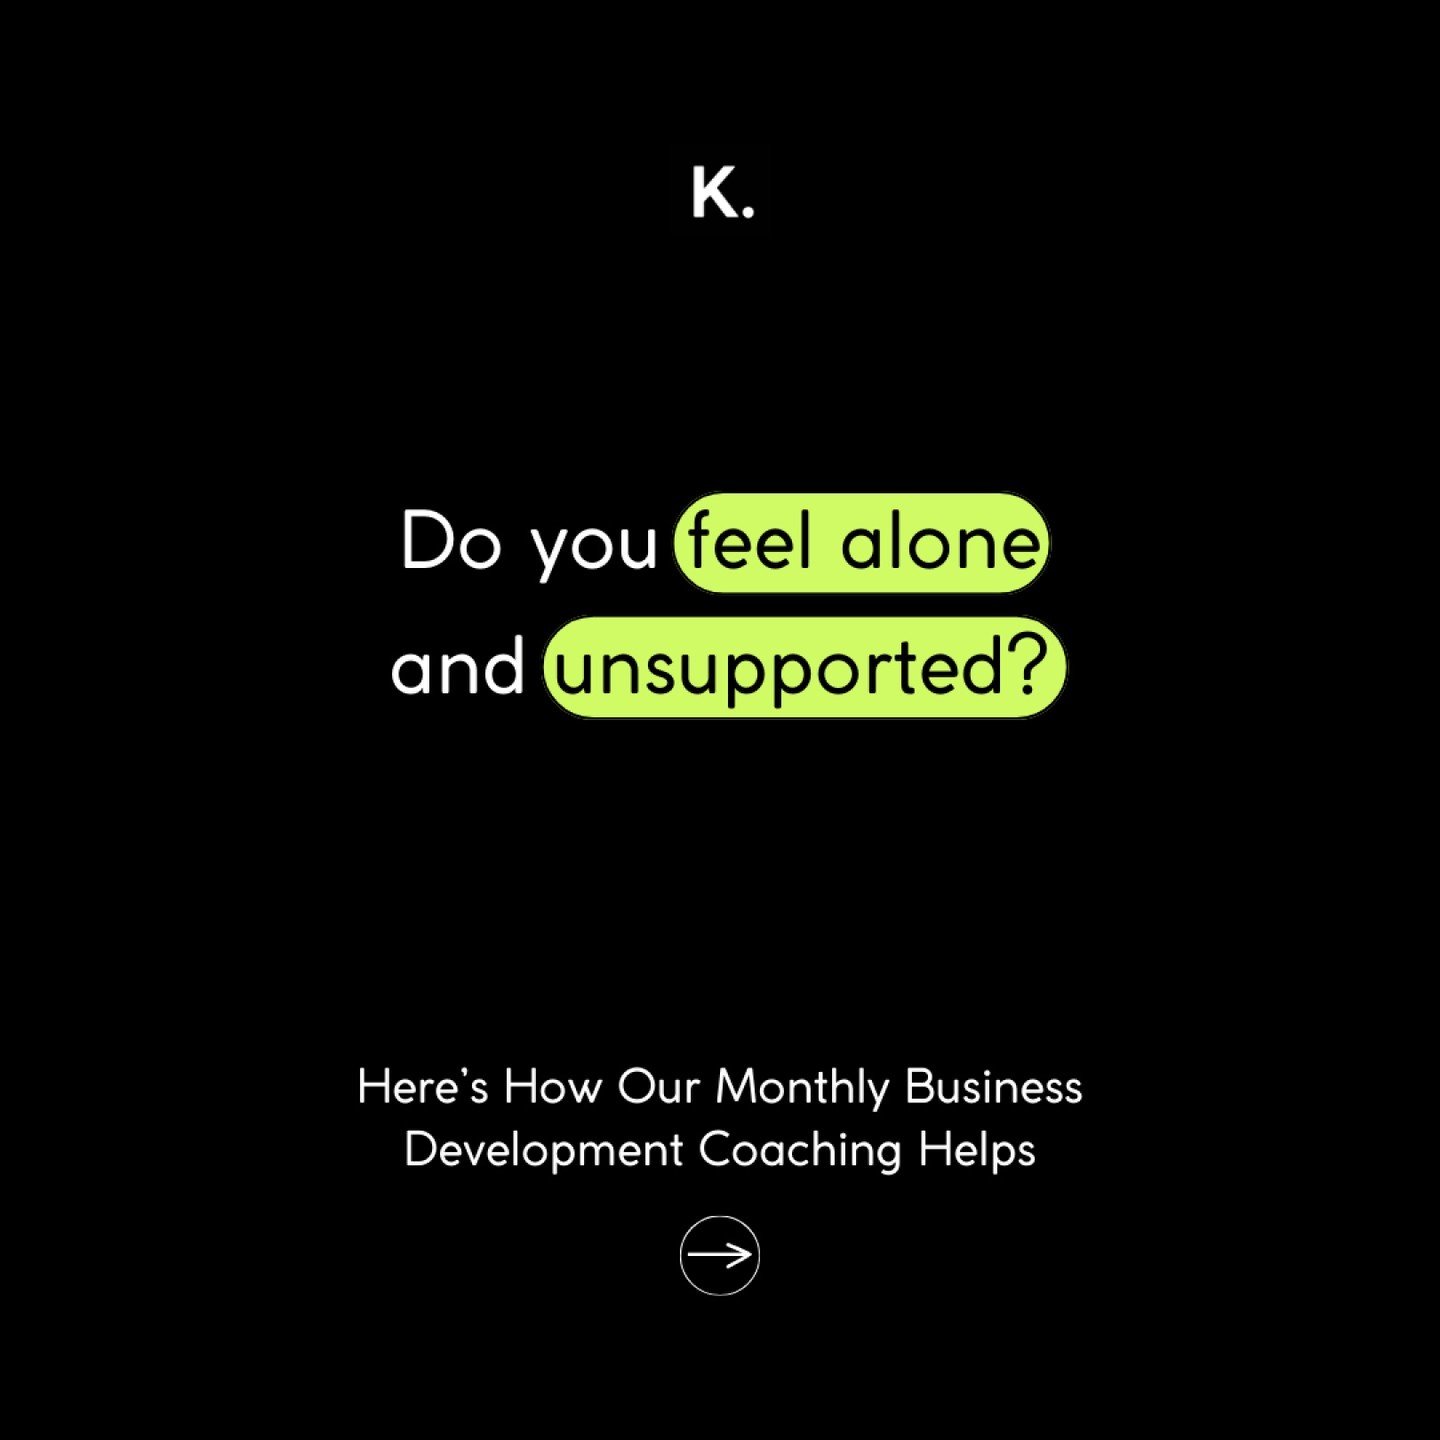 Feeling alone in your business journey? 

It's not uncommon to experience isolation and lack of support as an entrepreneur. But you don't have to navigate this road alone. Our Monthly Business Development Coaching program offers a lifeline&mdash;a re